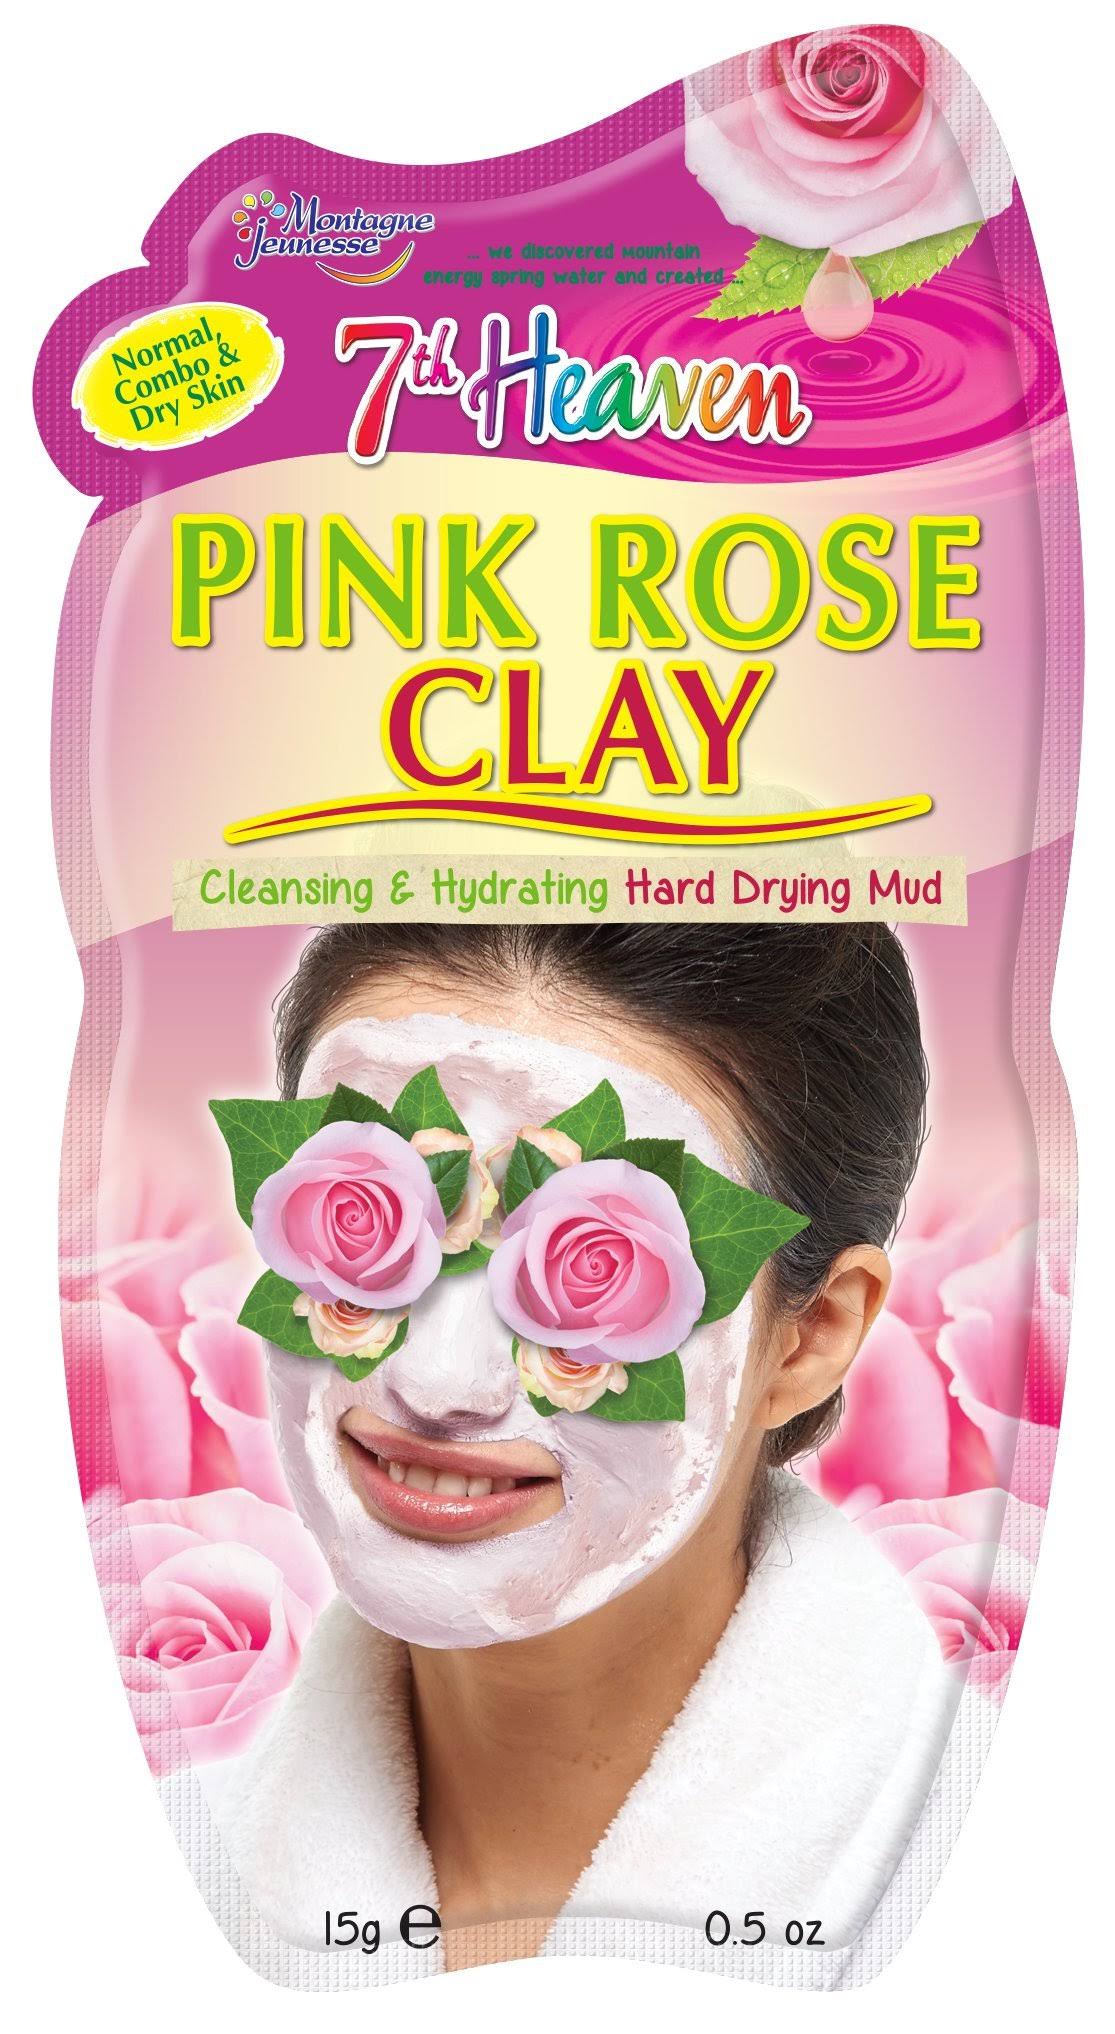 7th Heaven Pink Rose Clay Face Mask - 15g